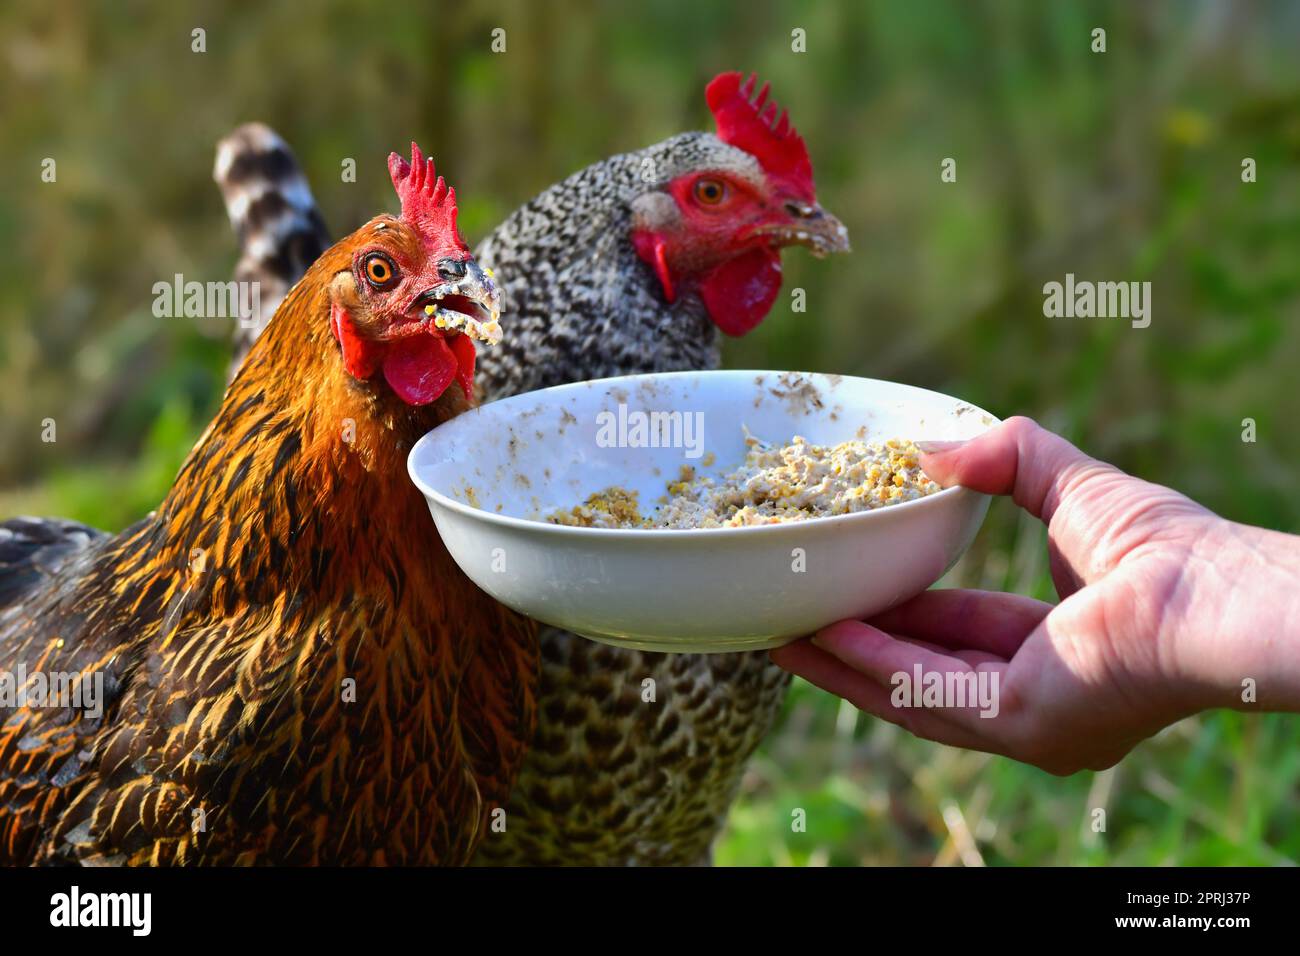 Portrait of two free running chicken of different breeds, eating some grain from a bowl Stock Photo